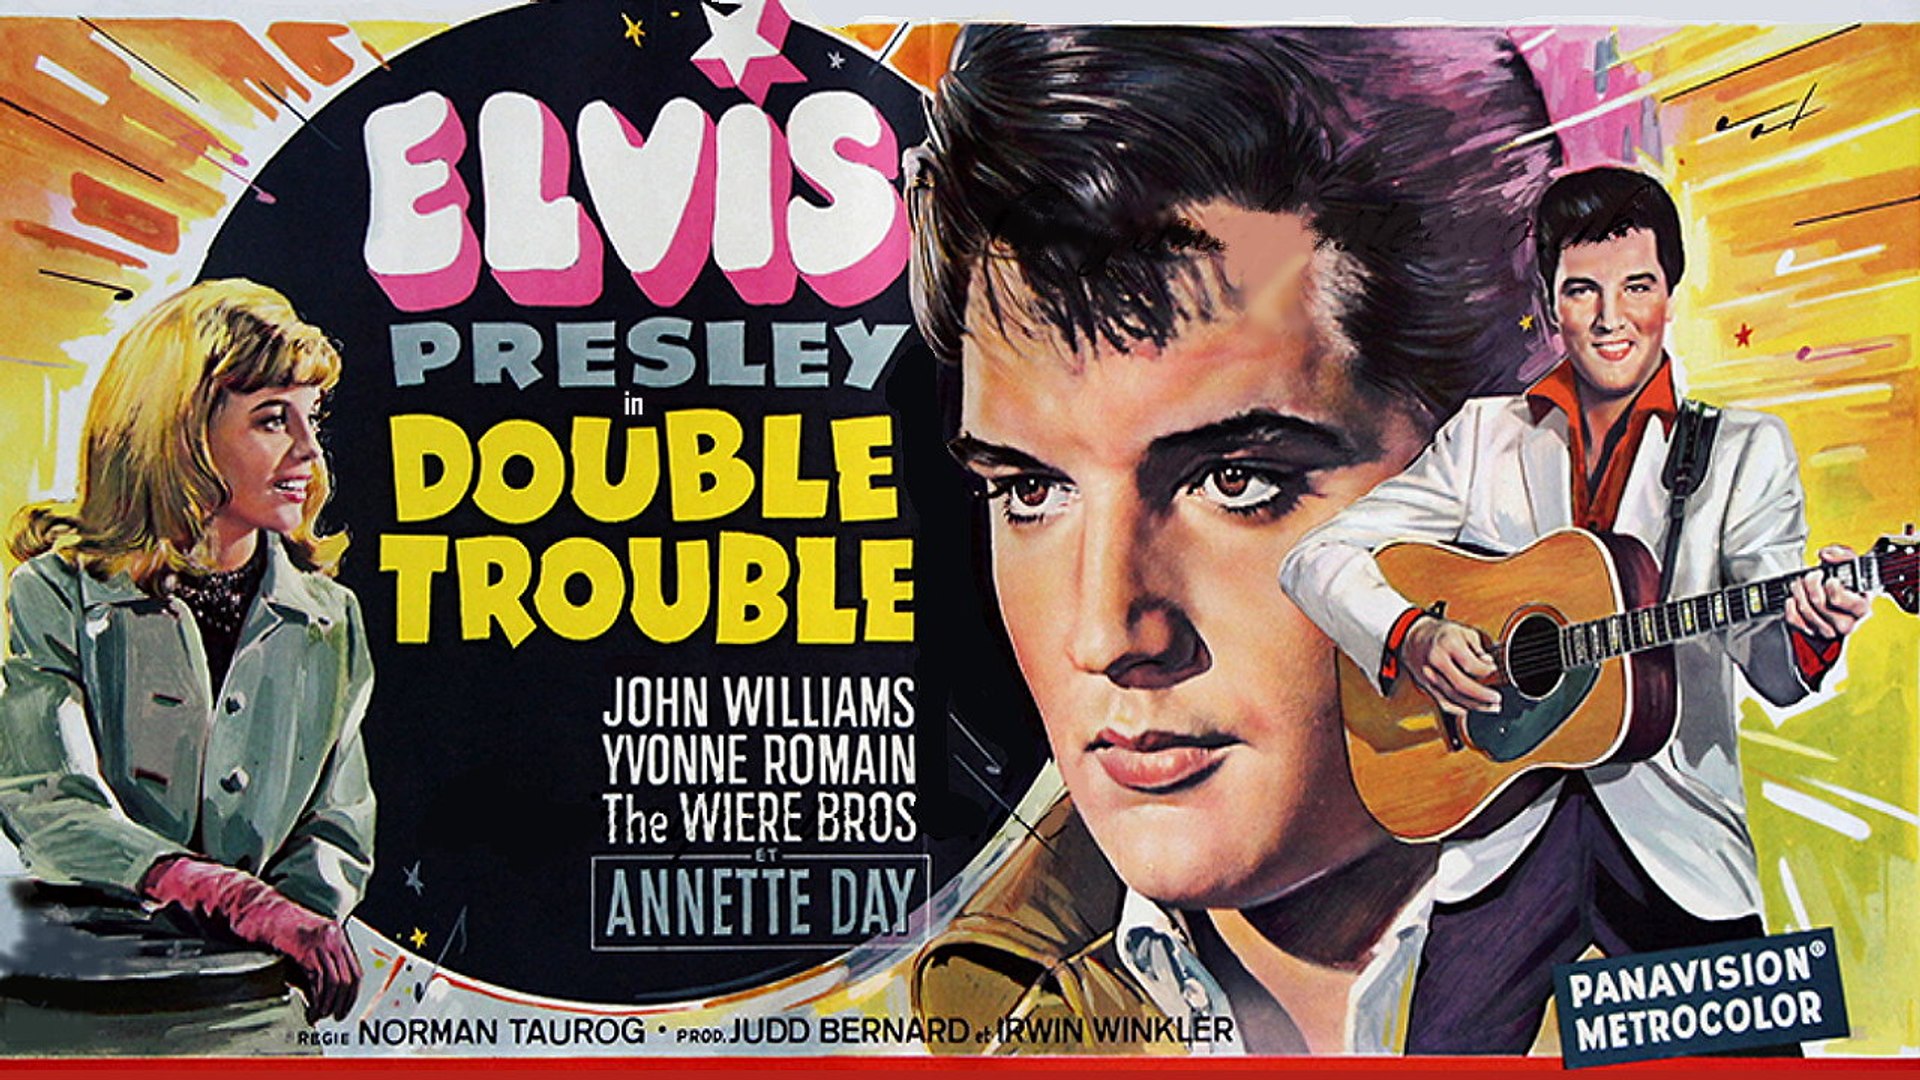 Double Trouble (E. Presley, 1967) Full HD - Video Dailymotion